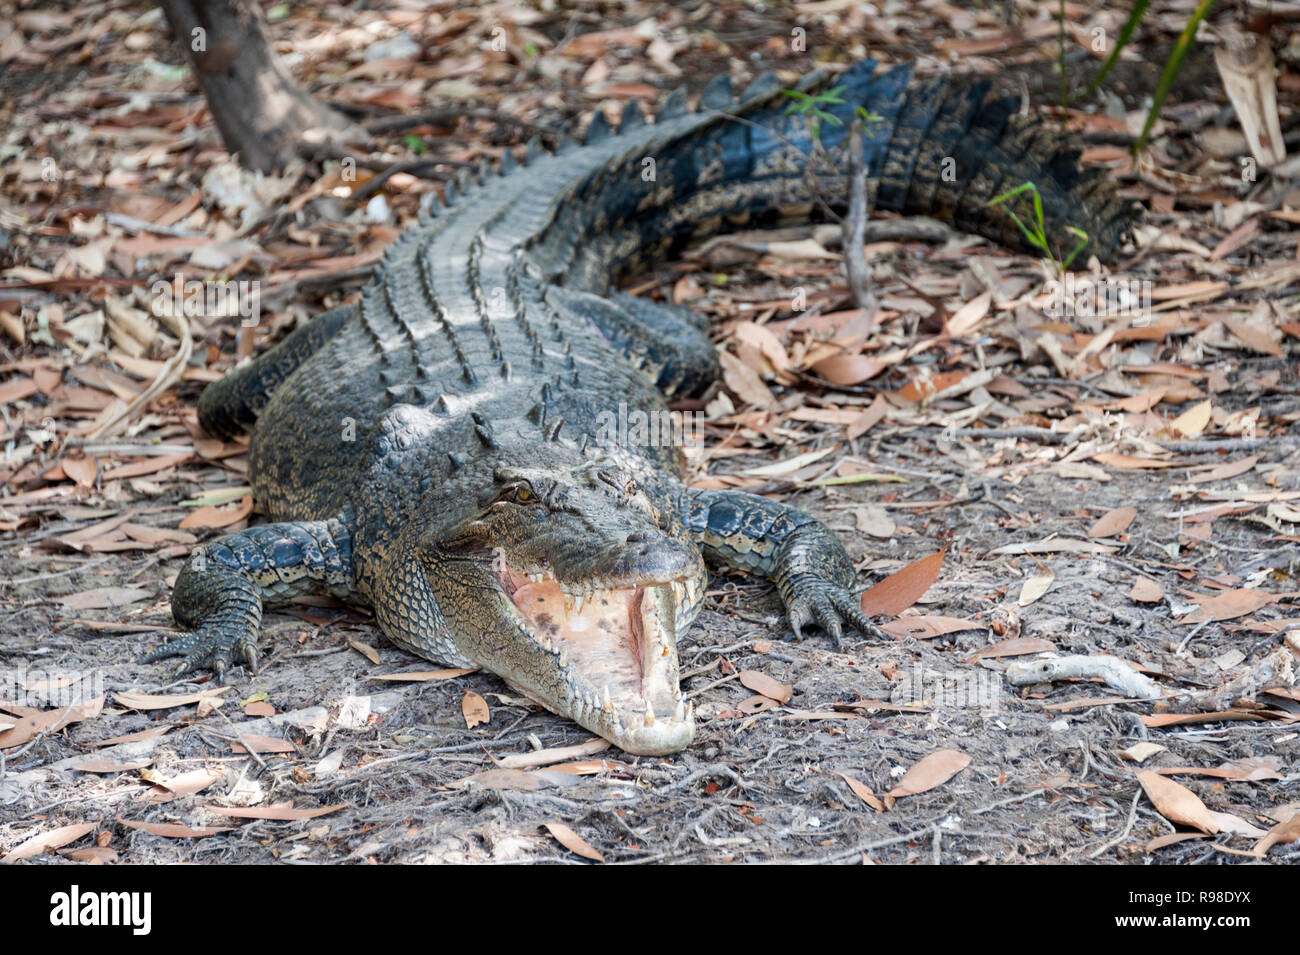 Salt water crocodile at the side of the river displaying its teeth, Northern Territory Australia Stock Photo